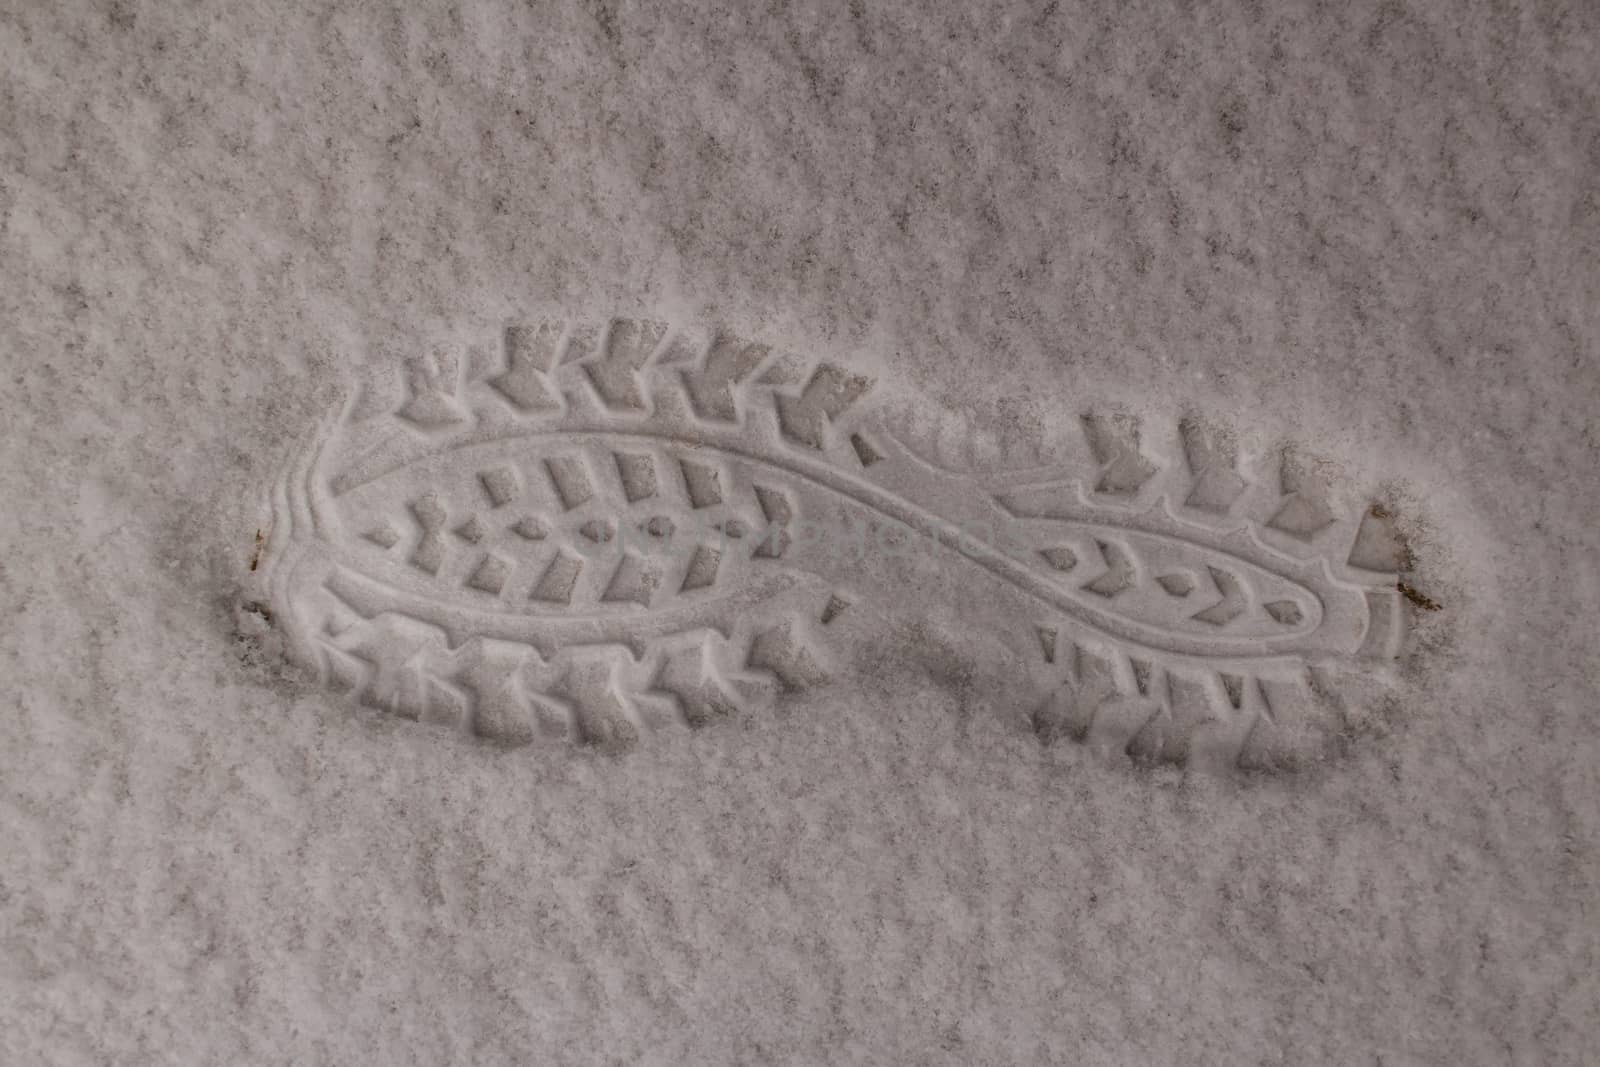 Footprint of the boot on white clear snow. Snow is very fluffy. Winter returned at the end of March.